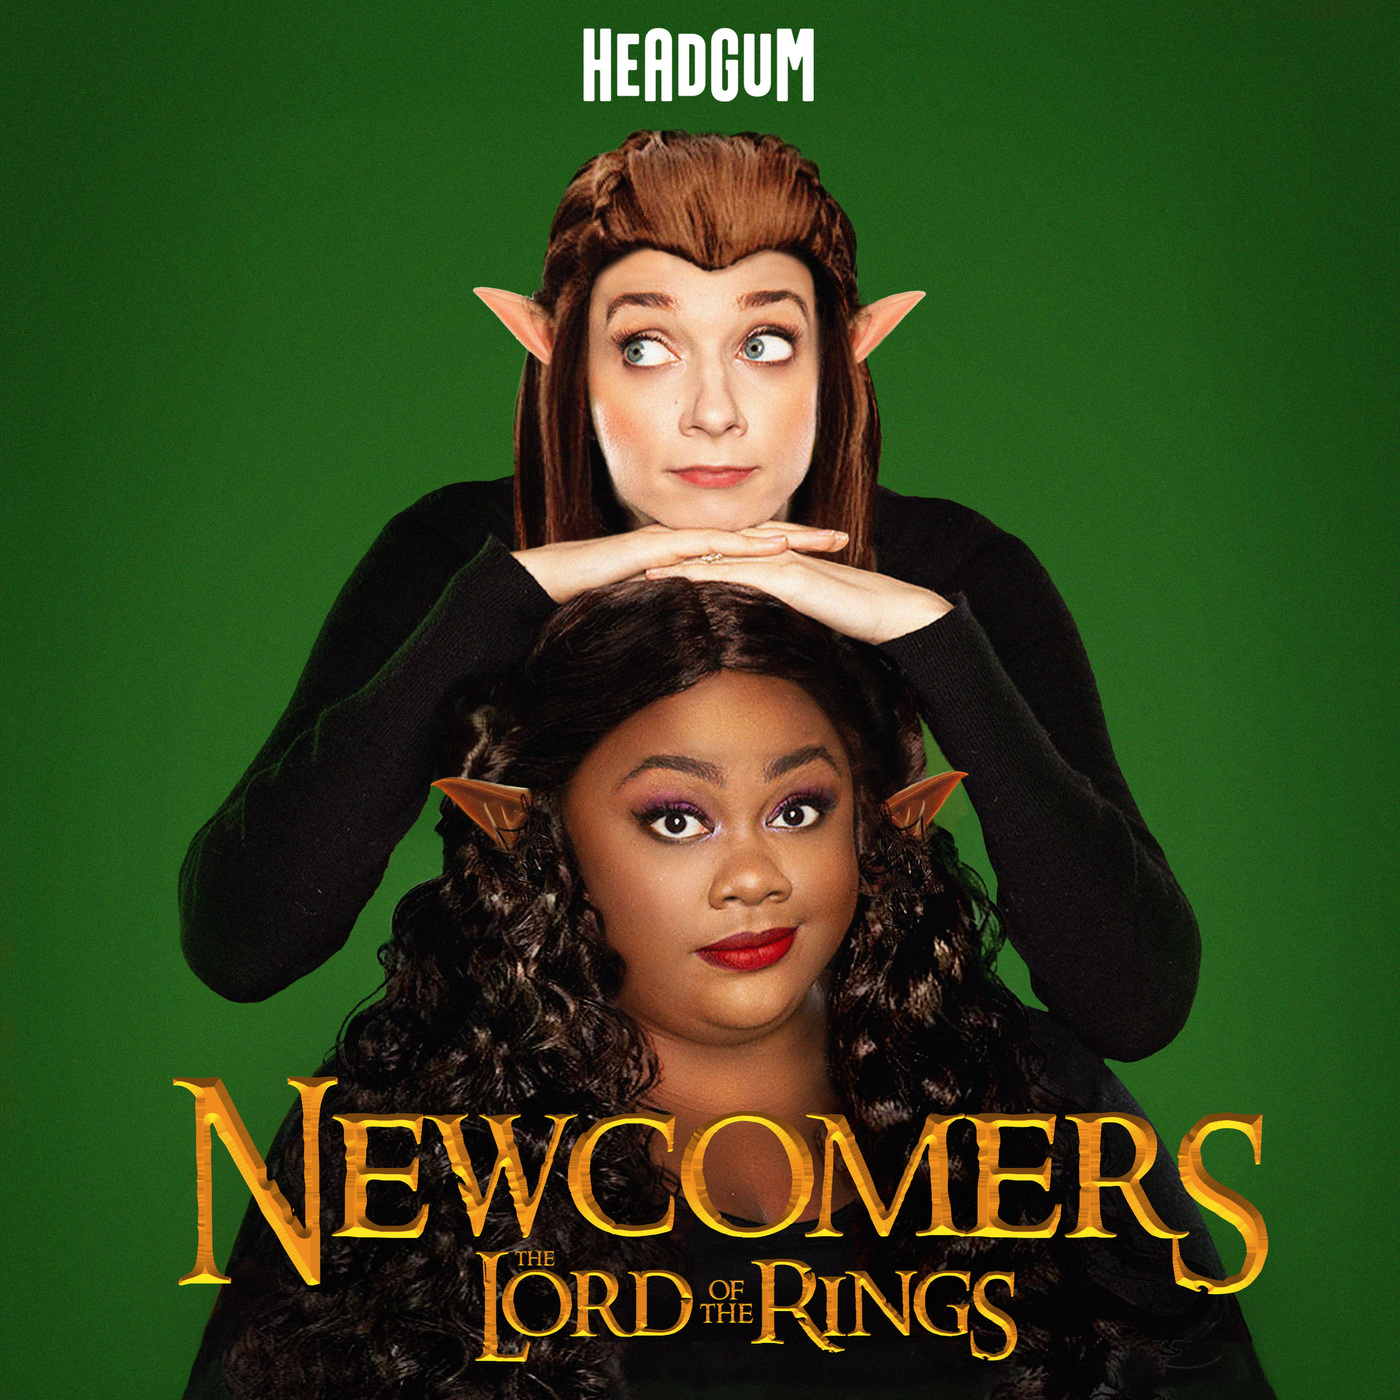 Nicole Byer and Lauren Lapkus are watching Lord of the Rings! (Trailer)